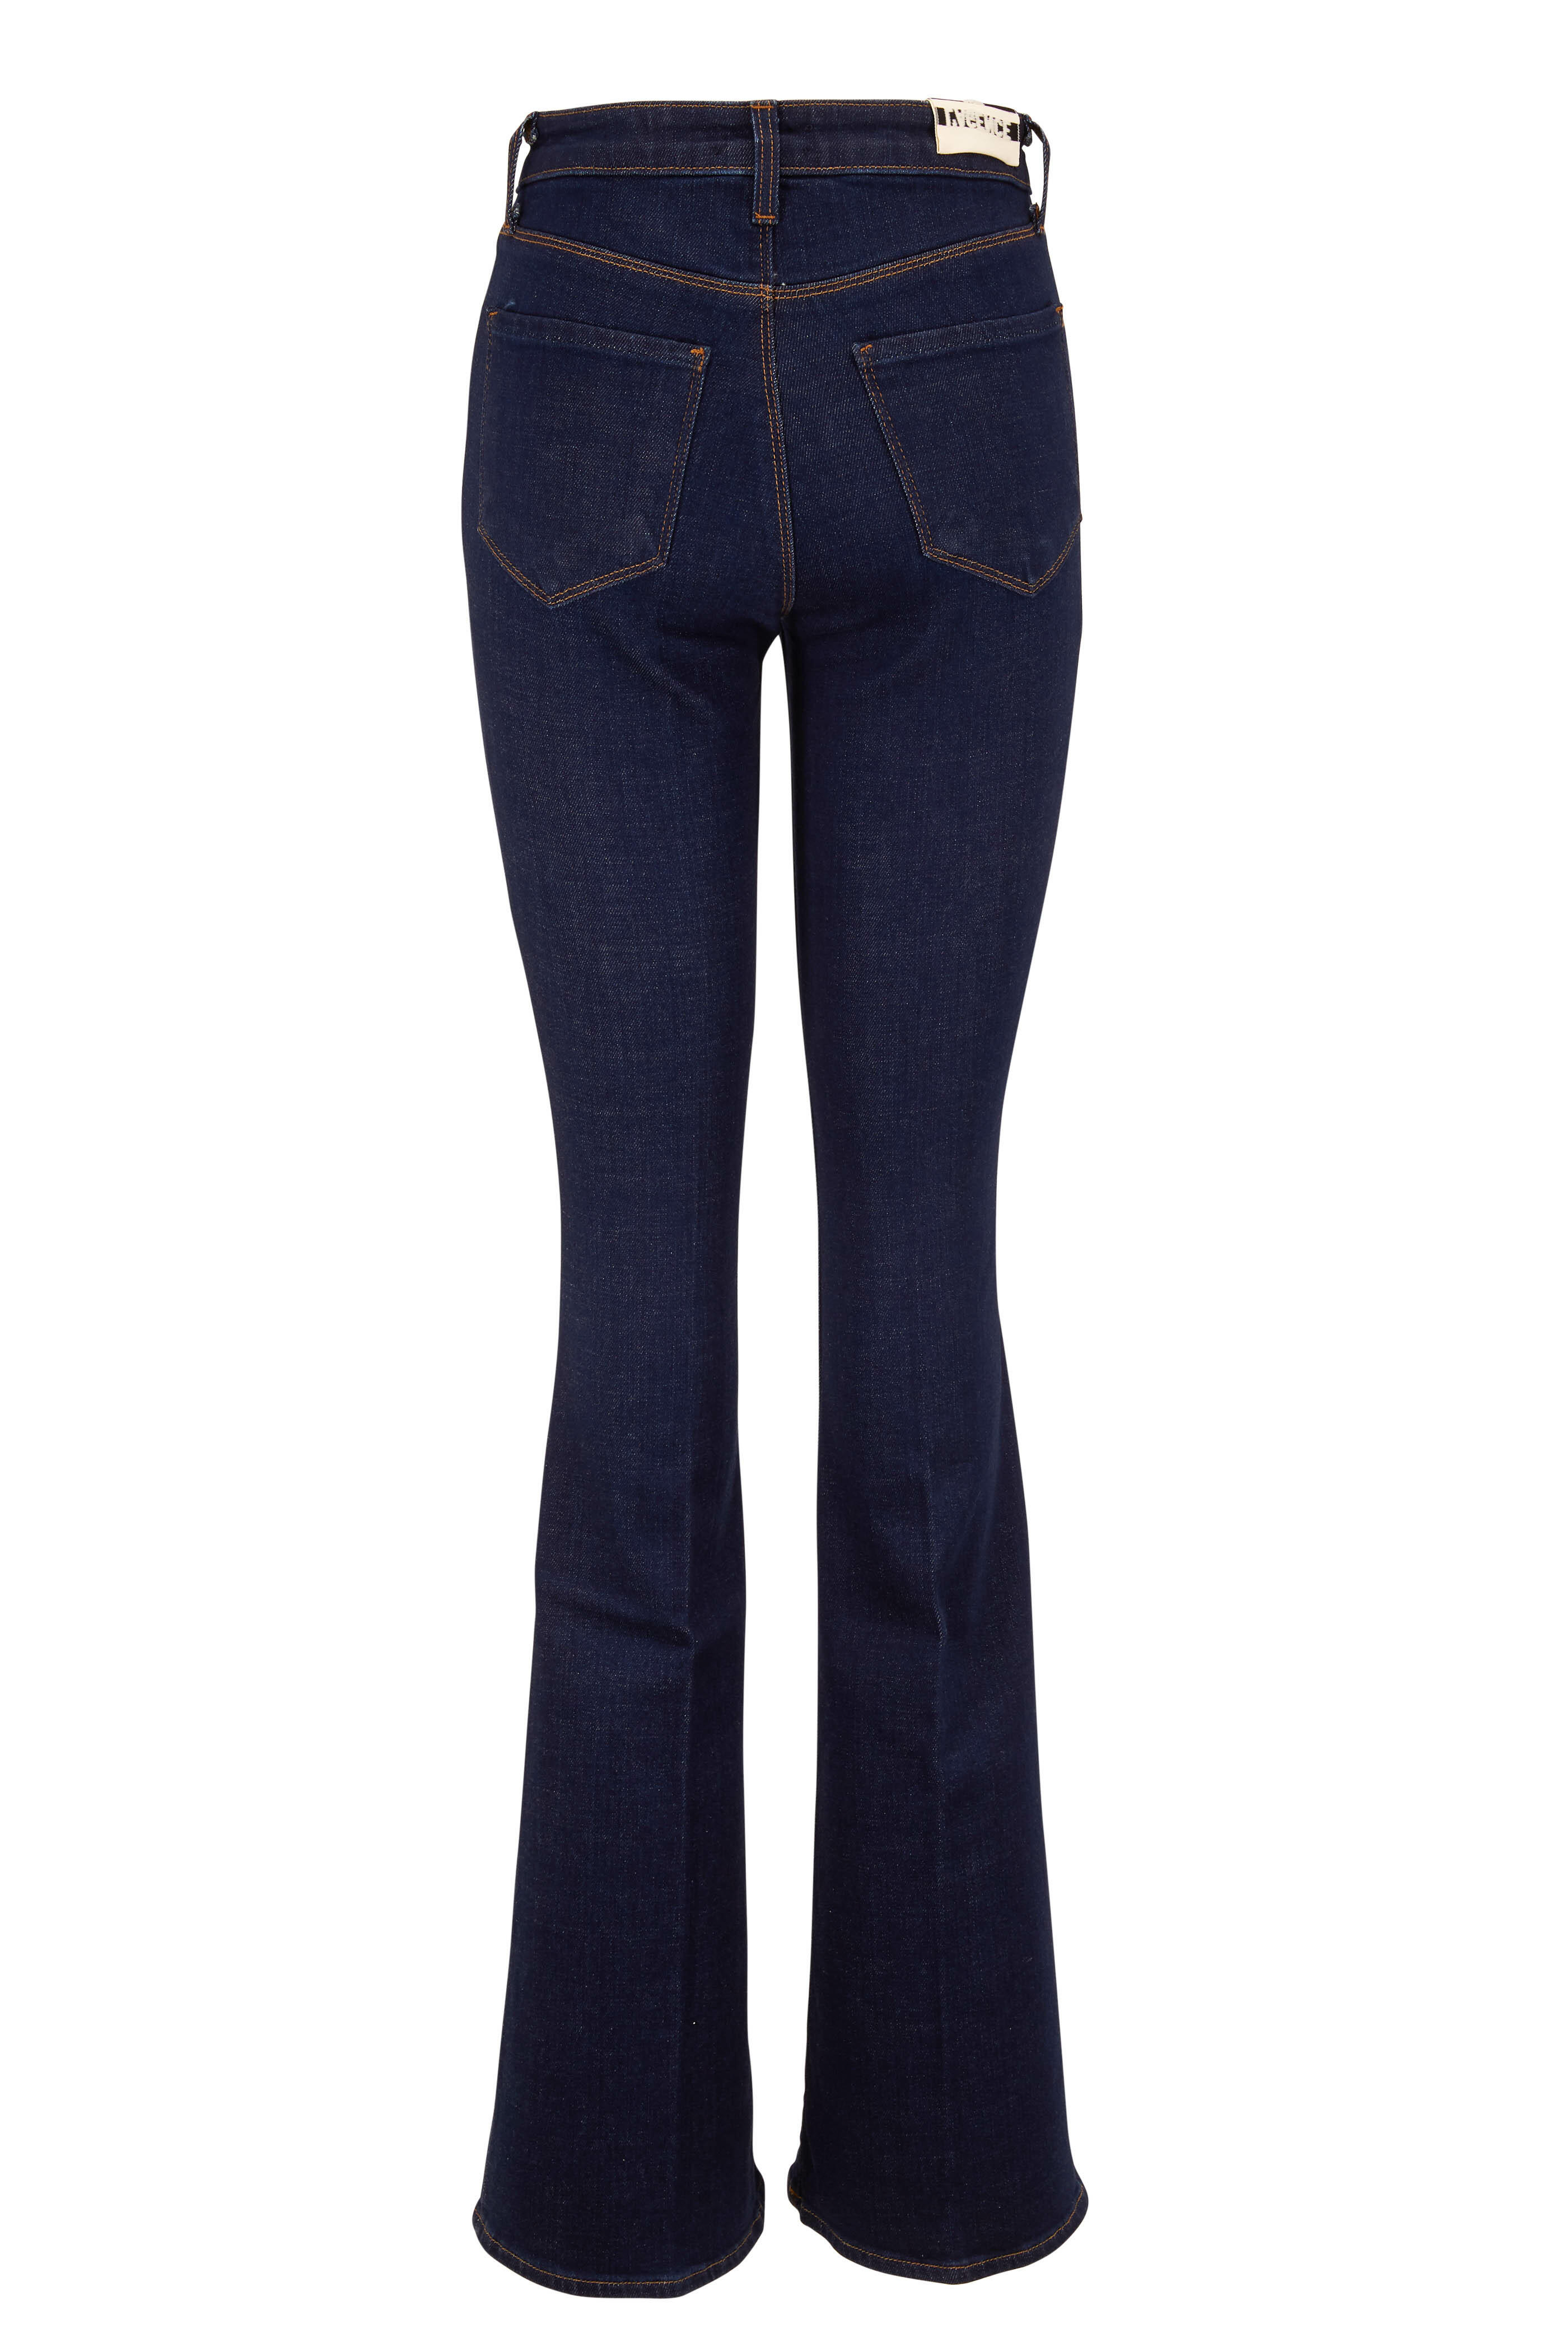 L'Agence - Bell Phoenix High-Rise Flare Jean